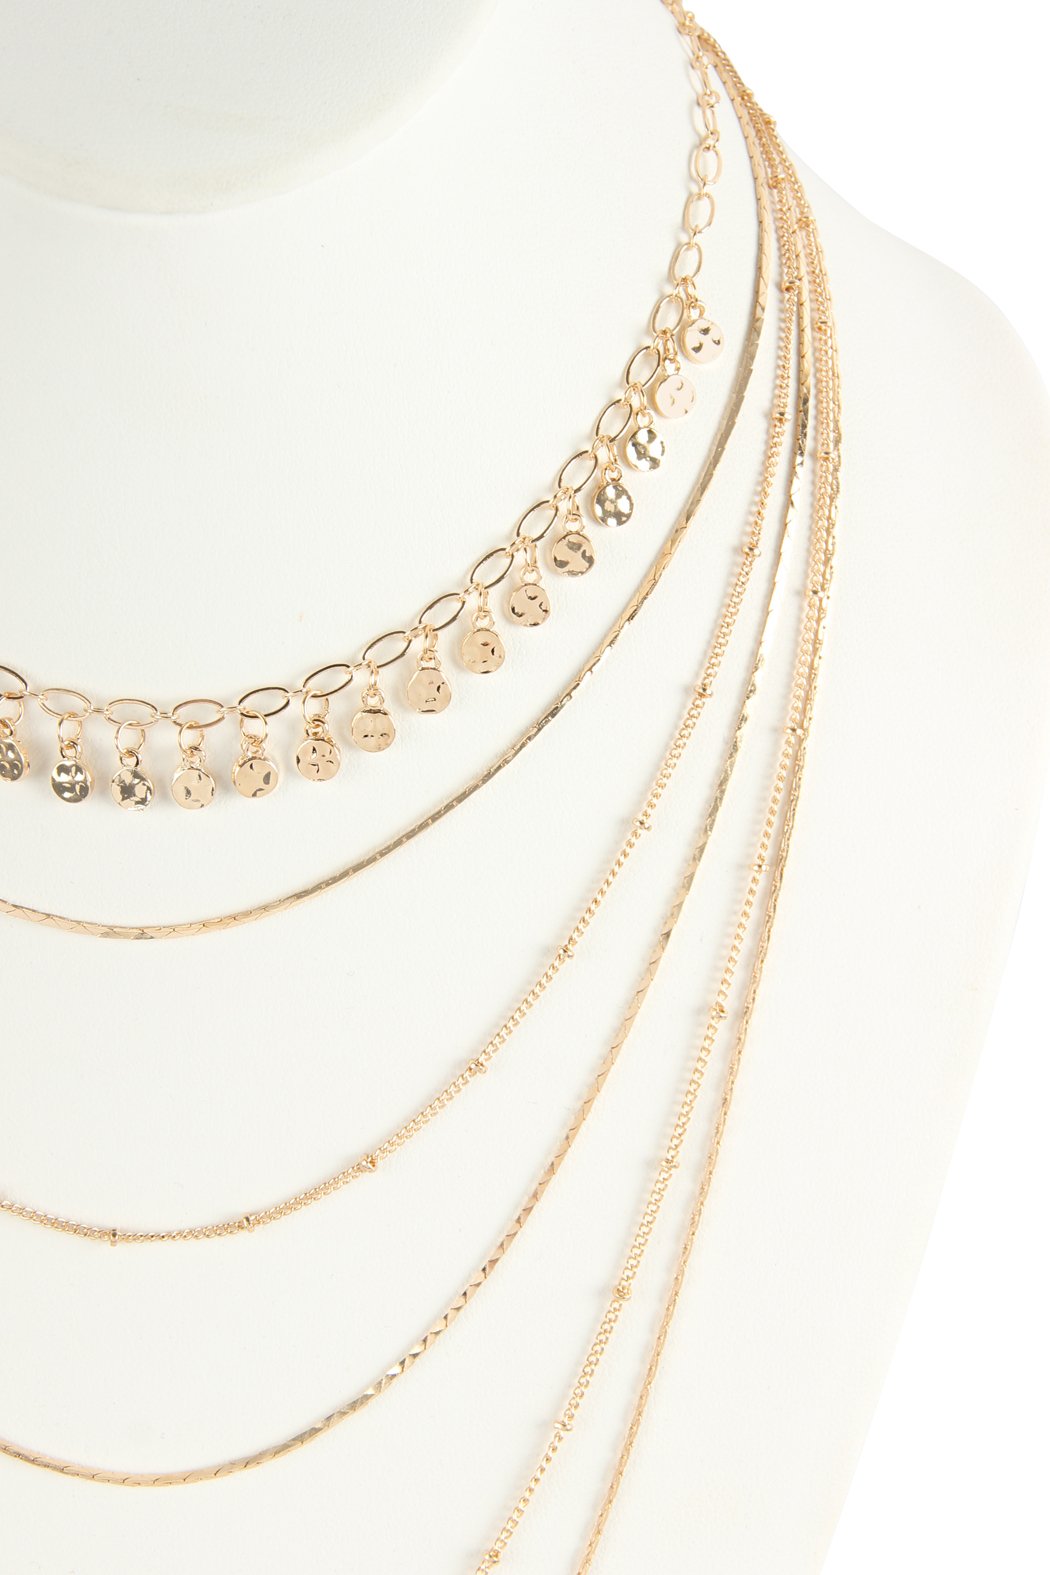 Hdn2640 - Delicate Layer Necklaces - LOLA LUXE